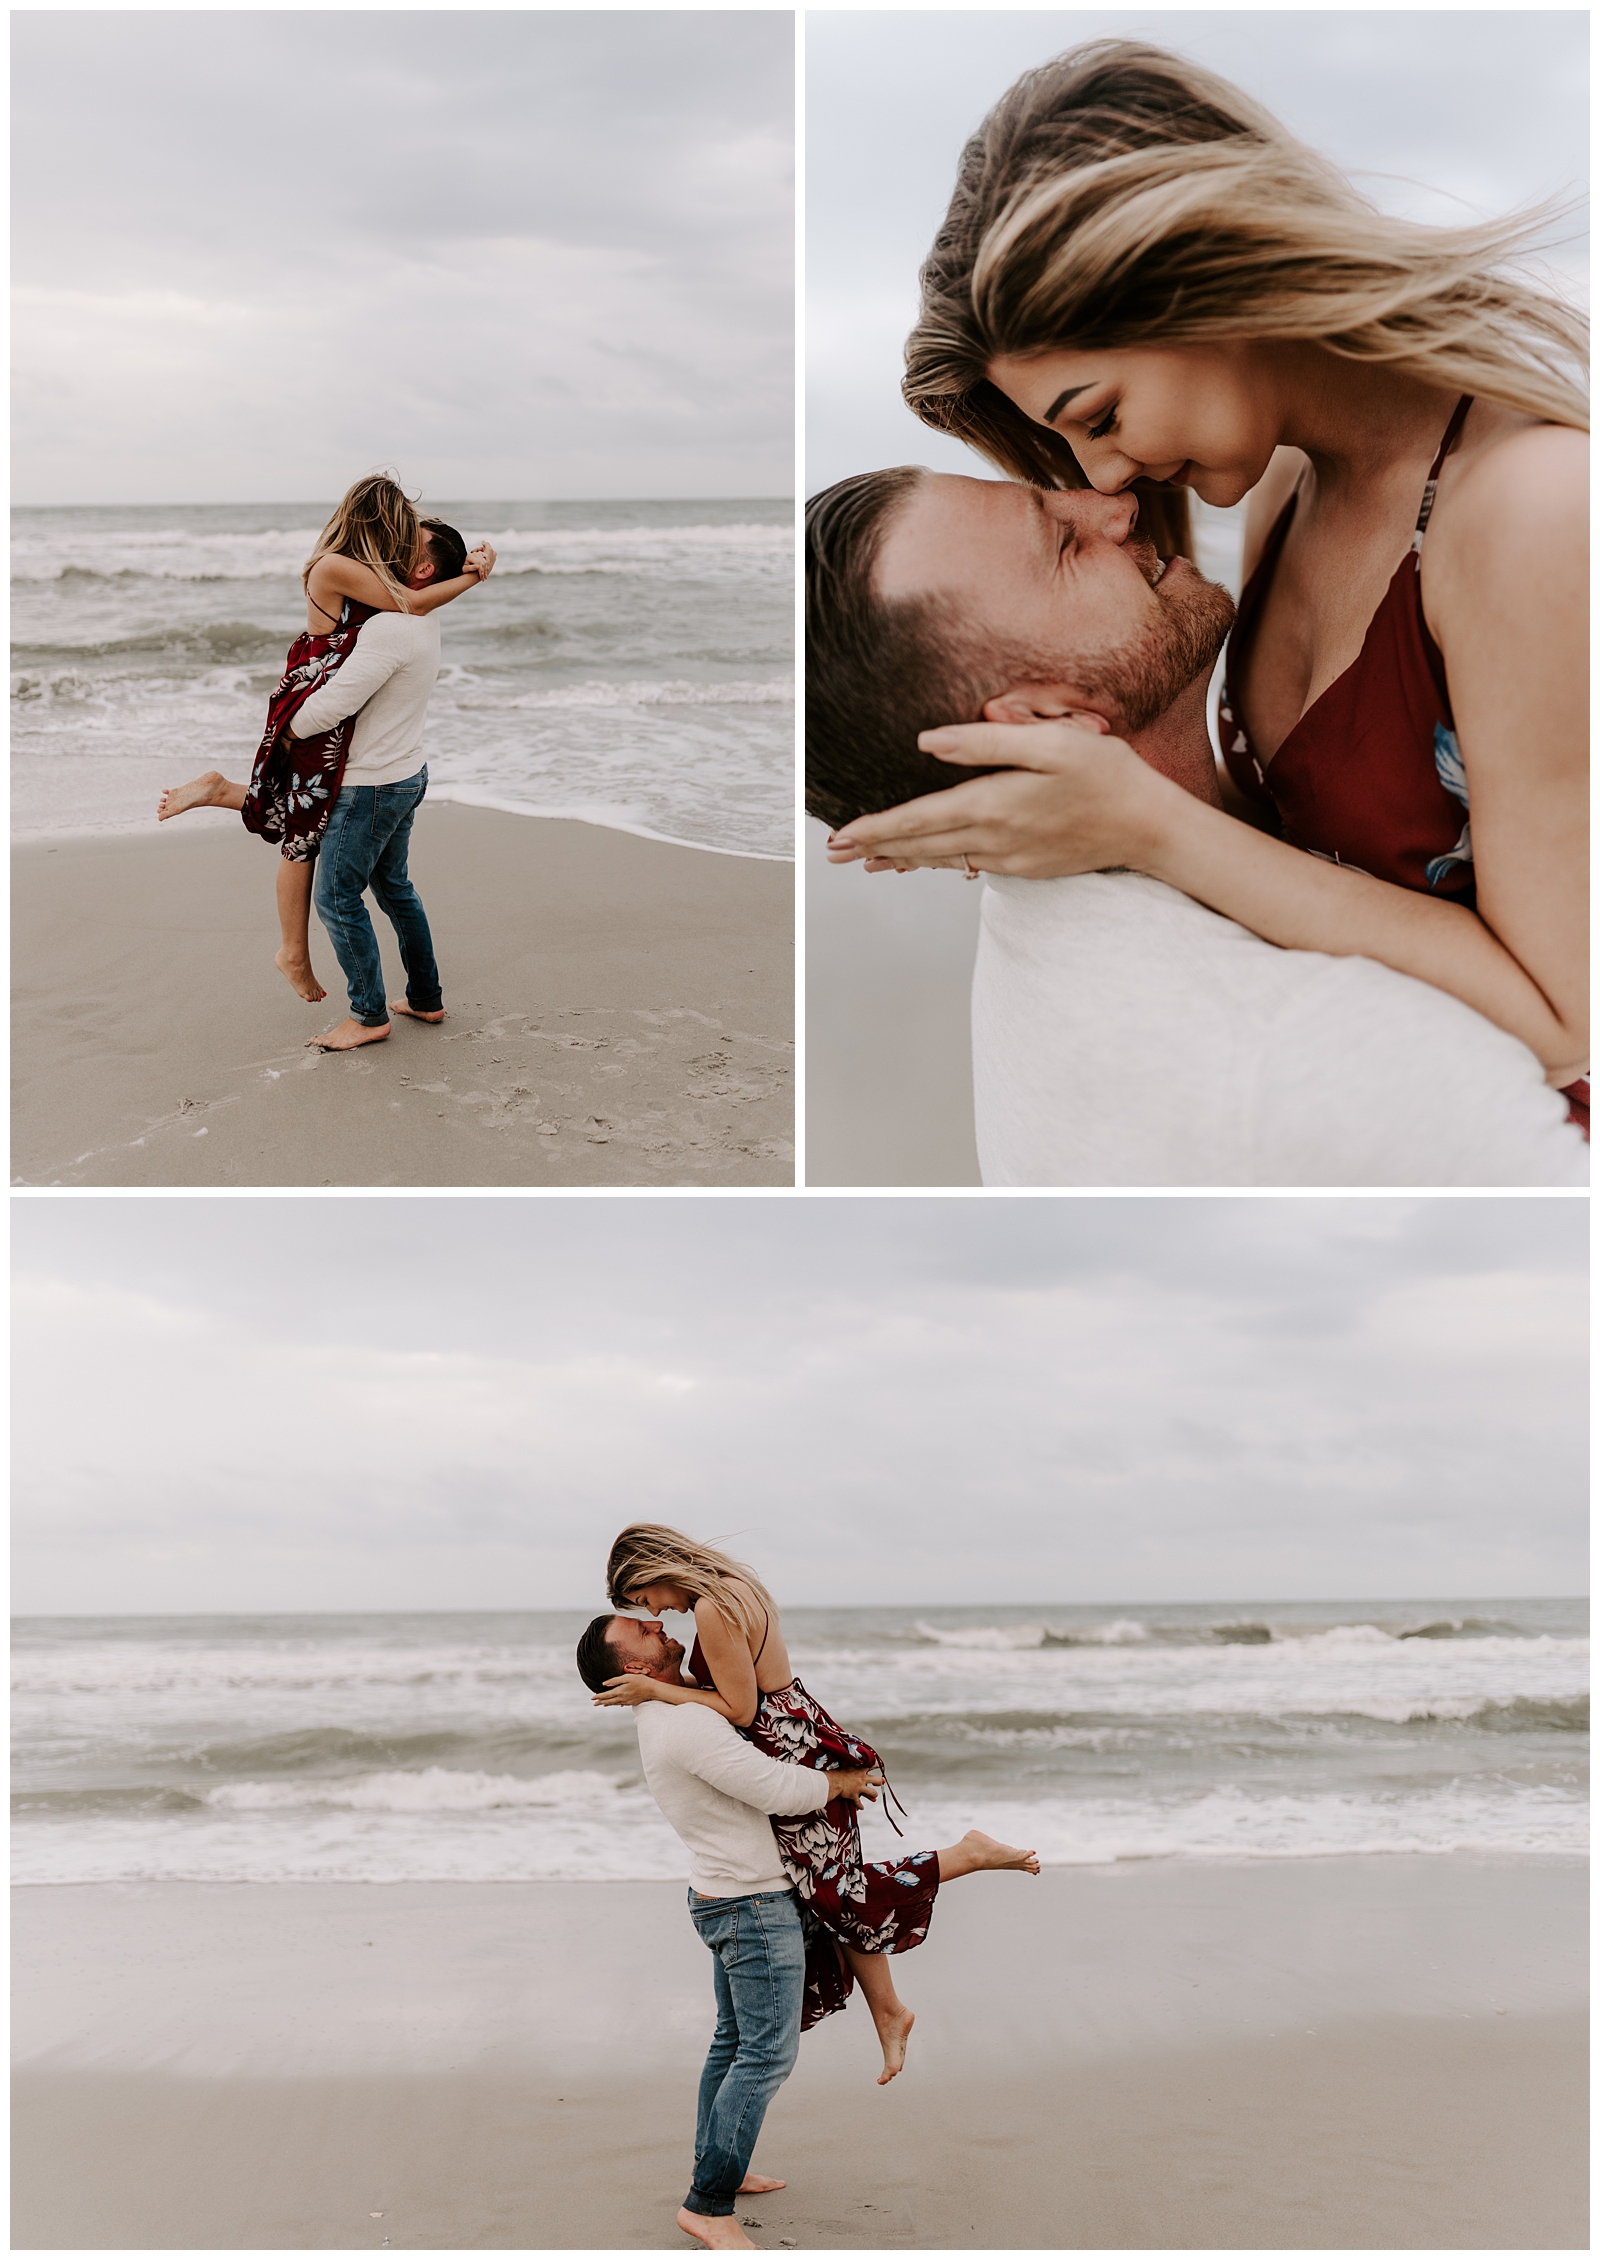 Engagement session photos at the beach in Wilmington, NC